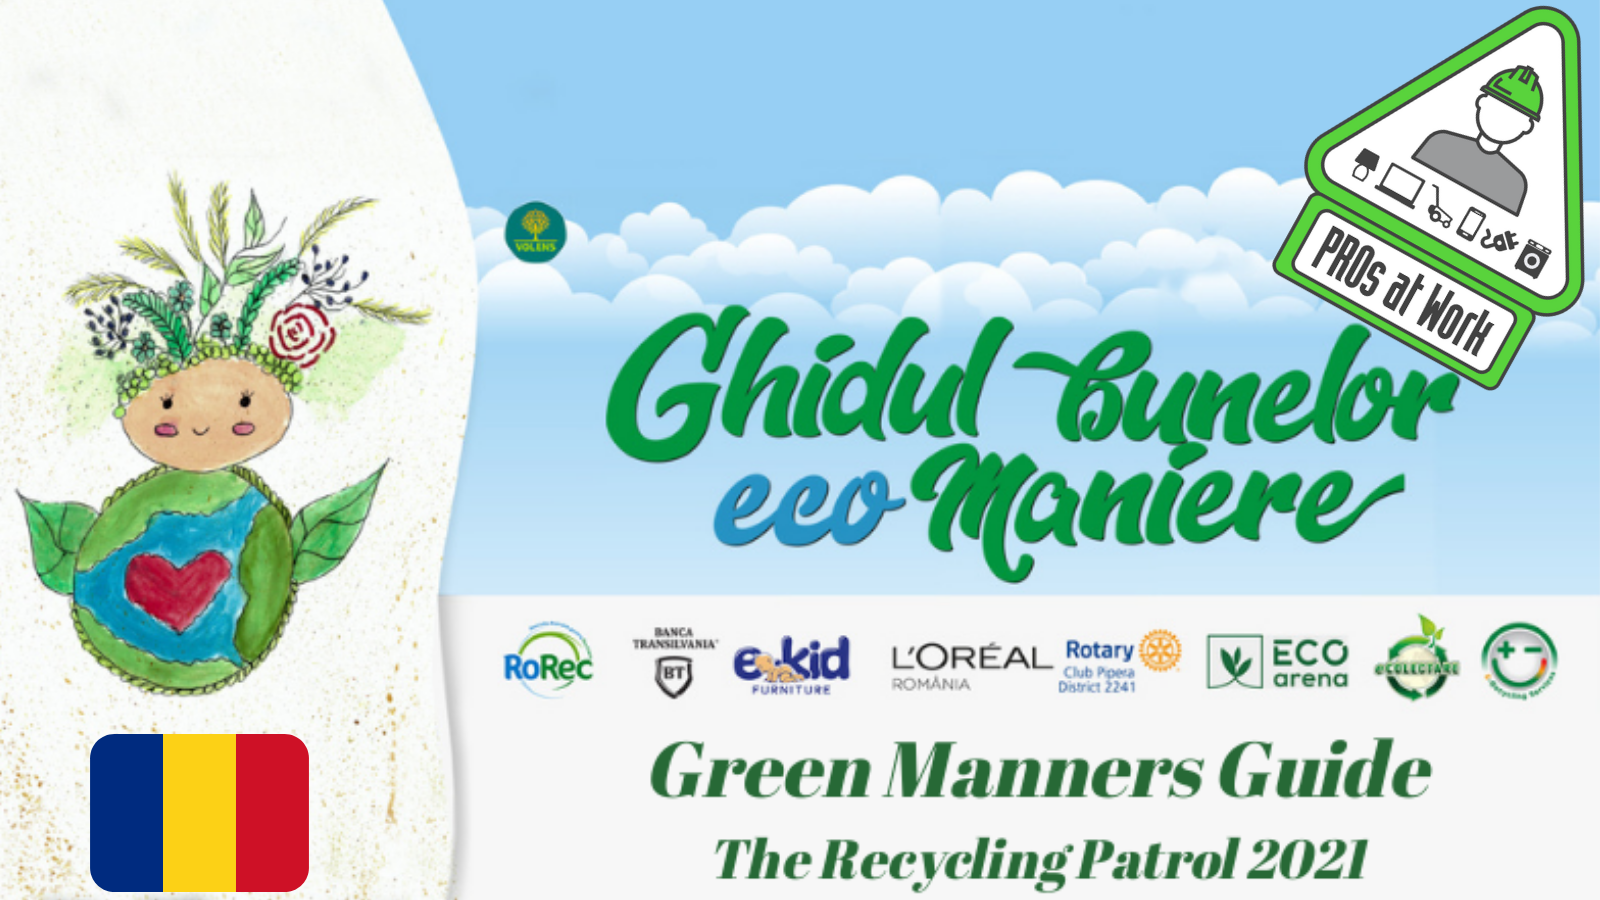 PROsAtWork RoRec Romania issues The Green Manners Guide e-book